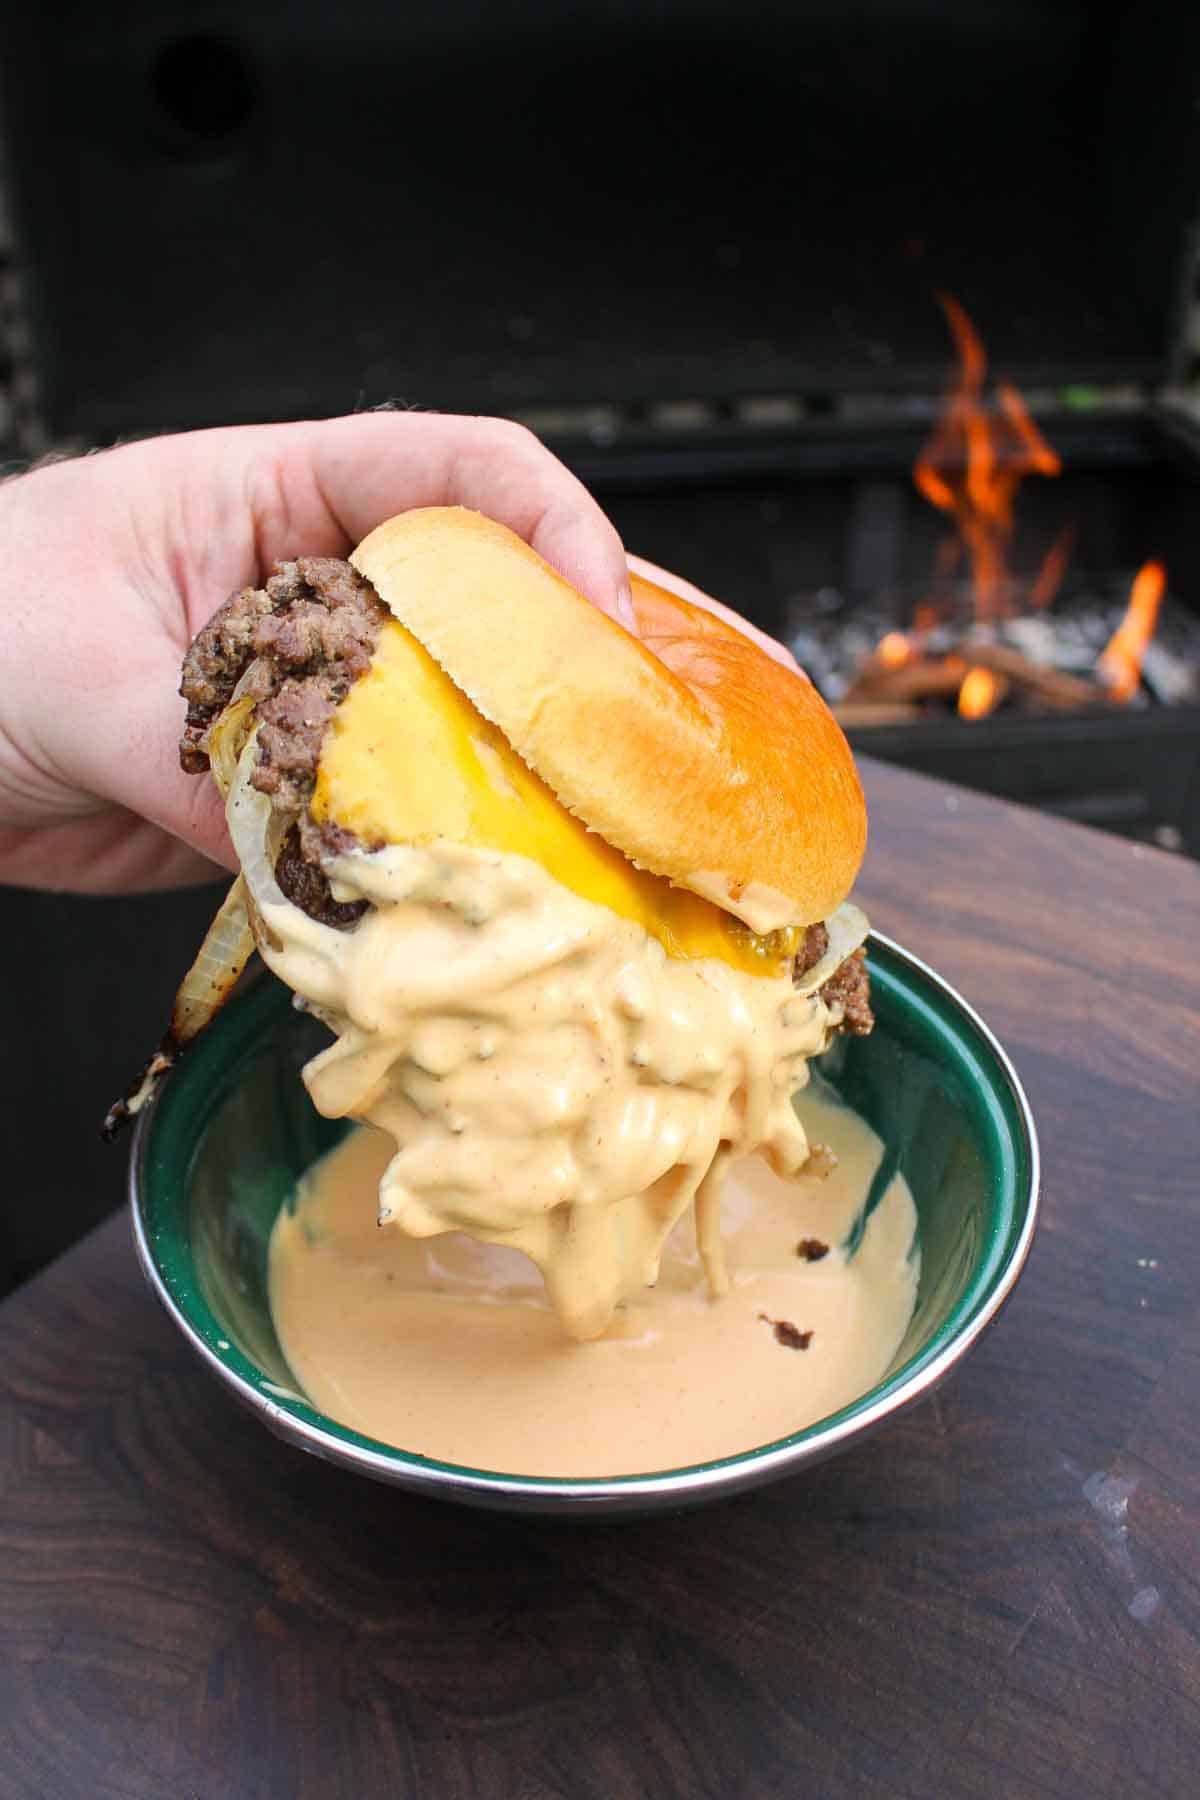 The onion burger is dipped in special sauce. 